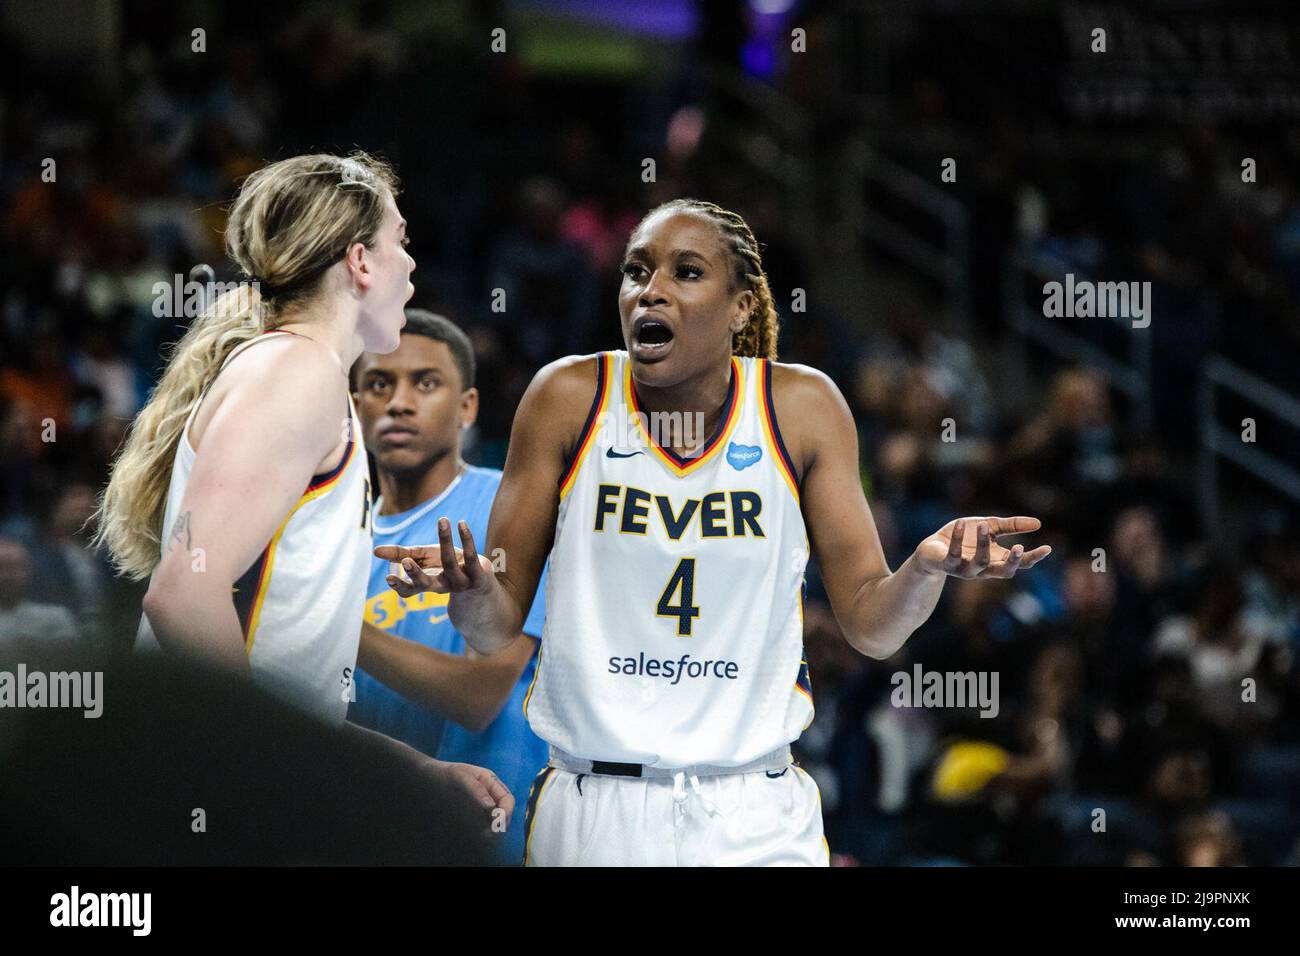 Chicago, United States. 24th May, 2022. Queen Egbo (4 Indiana Fever) is upset with a teammate during the game between the Chicago Sky and Indiana Fever on Tuesday May 24, 2022 at Wintrust Arena, Chicago, USA. (NO COMMERCIAL USAGE) Shaina Benhiyoun/SPP Credit: SPP Sport Press Photo. /Alamy Live News Stock Photo